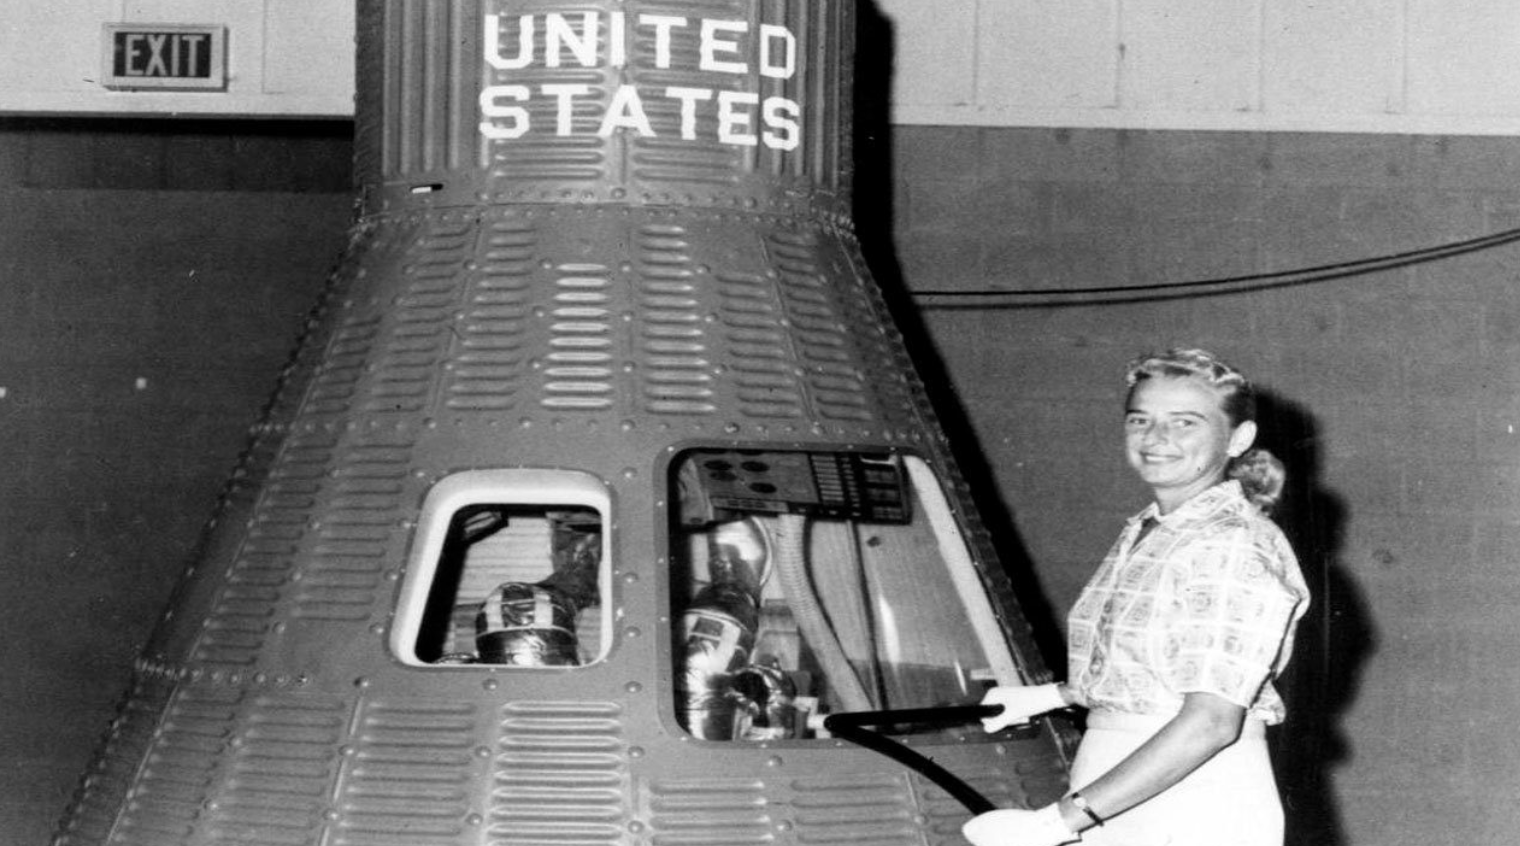 Jerrie Cobb Passed Astronaut Tests But NASA Kept Her Out of Space